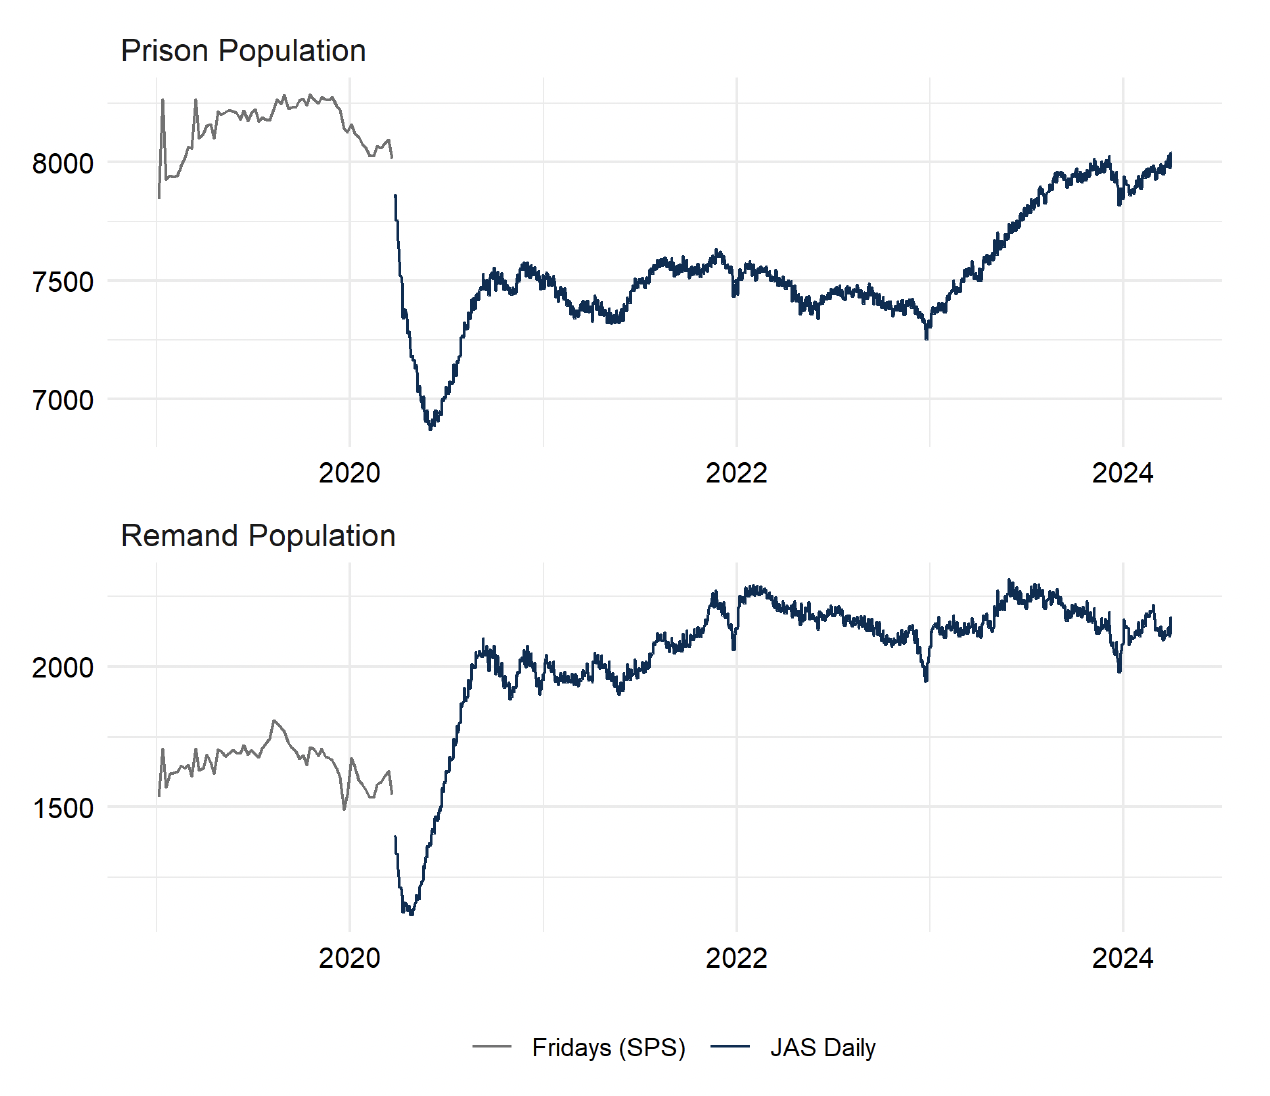 The Friday prison population overall and the remand population up to March 2020. Thereafter, daily population figures are provided. The trends are described in the body text. Last updated April 2024. Next update due May 2024.